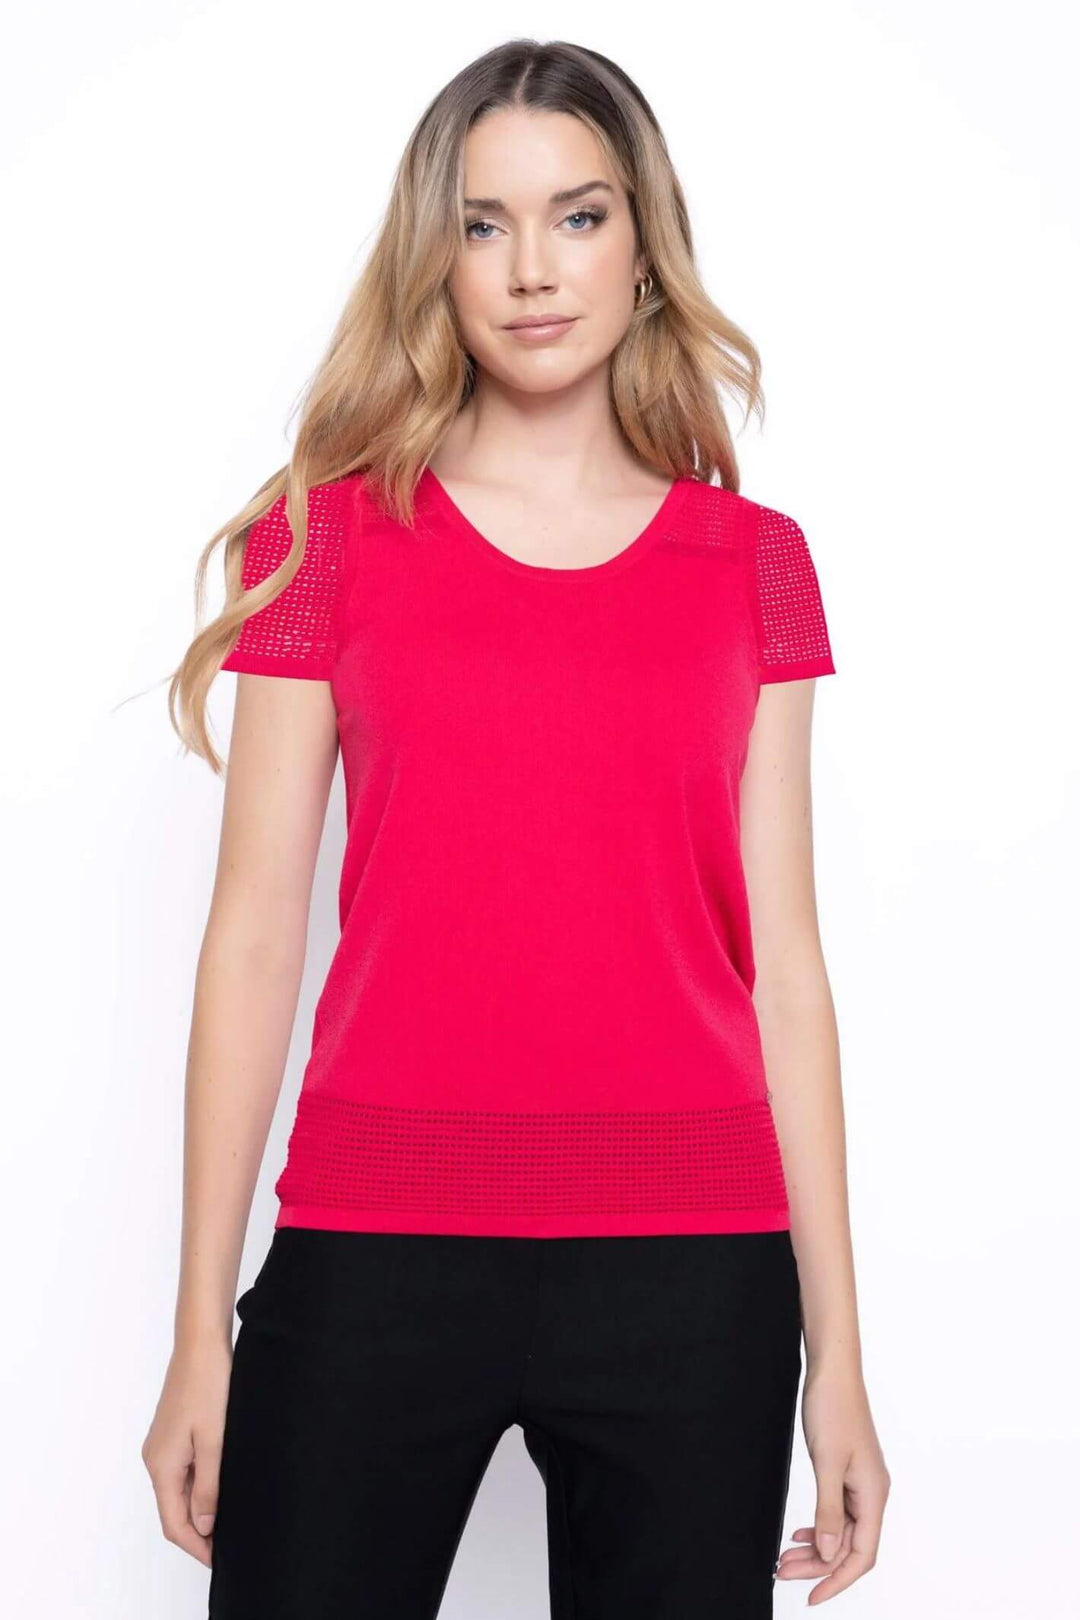 Picadilly JK790 Cerise Short Sleeve Knitted Top